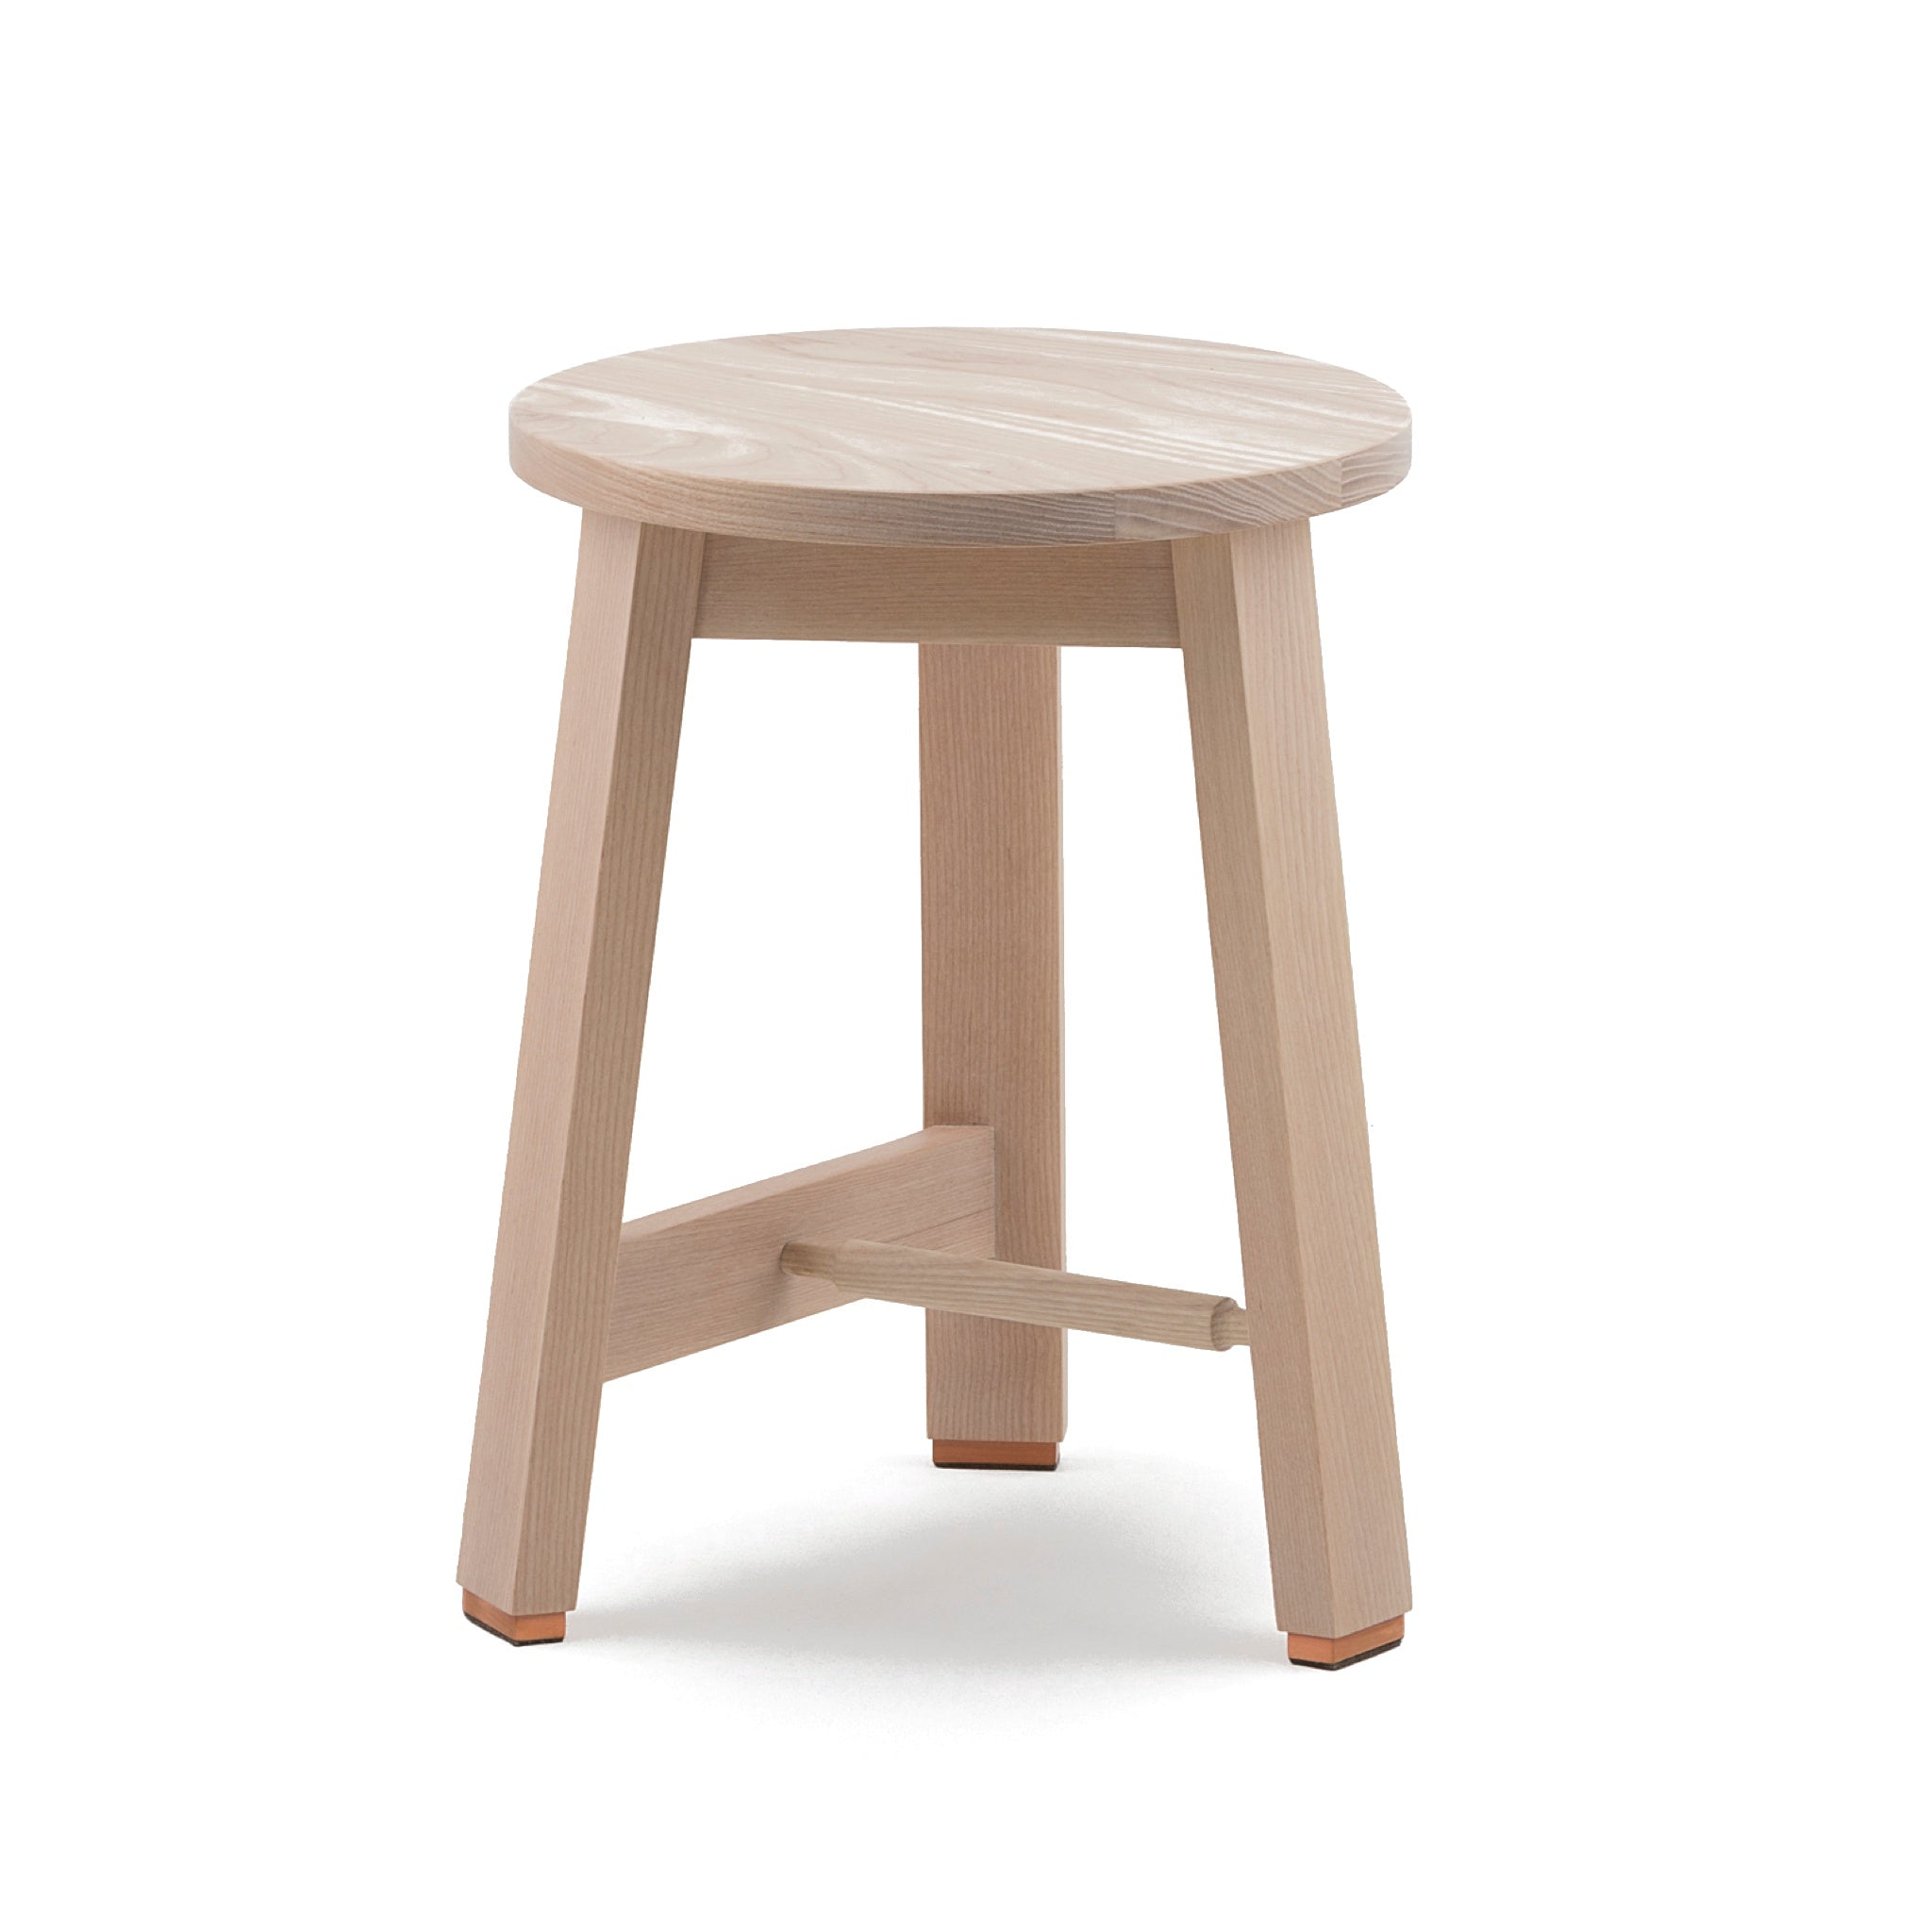 441 Stool by Ilse Crawford